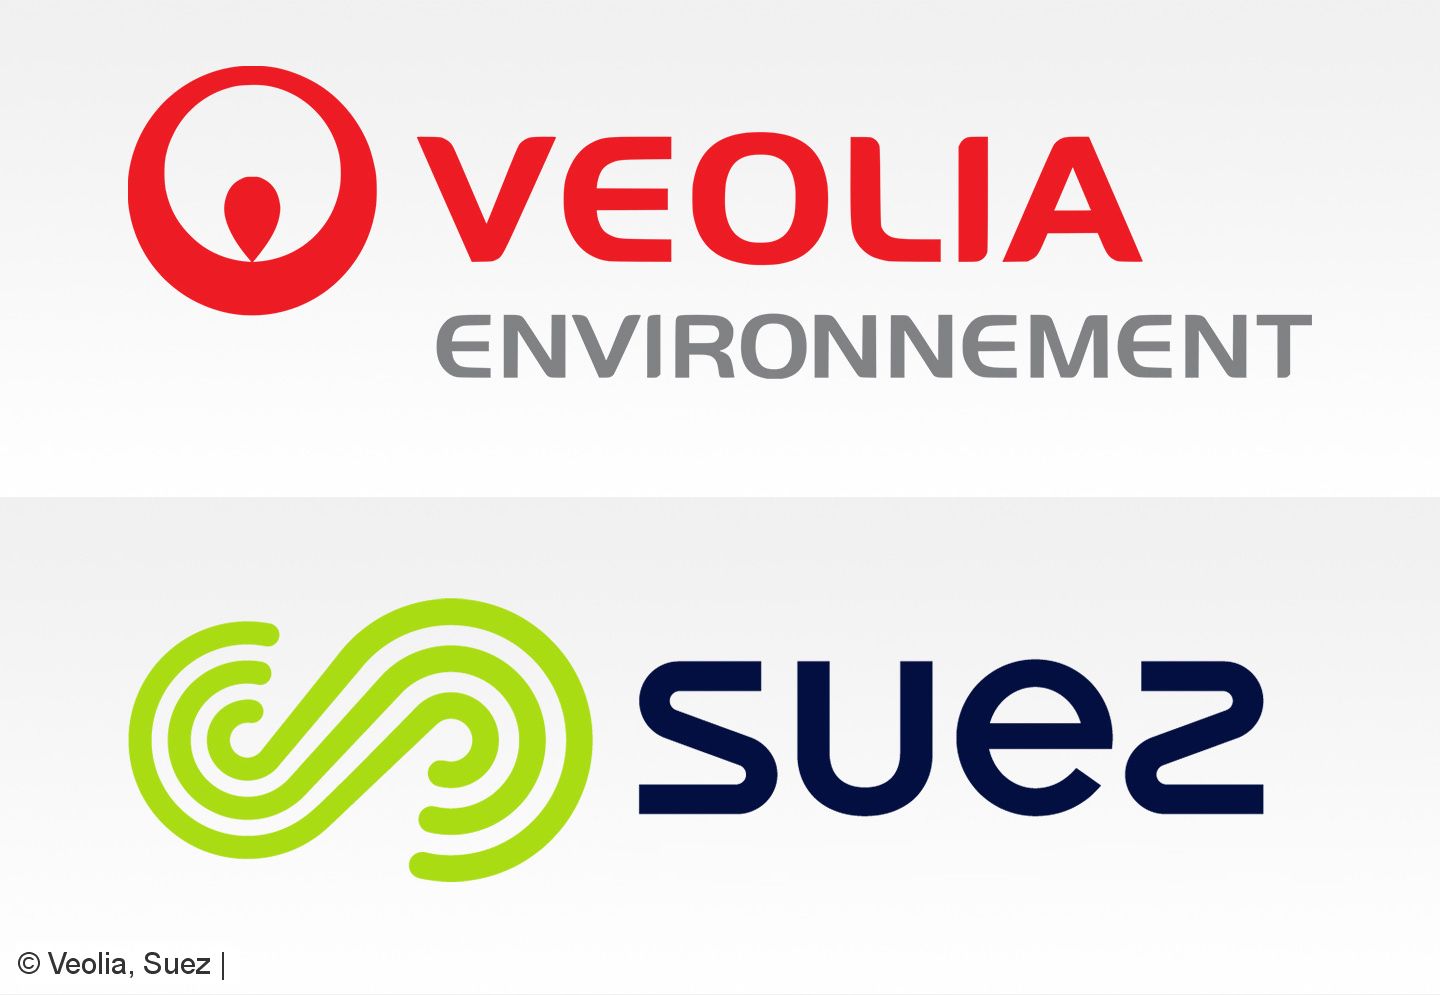 Sale of Engie's Suez shares to Veolia remains suspended